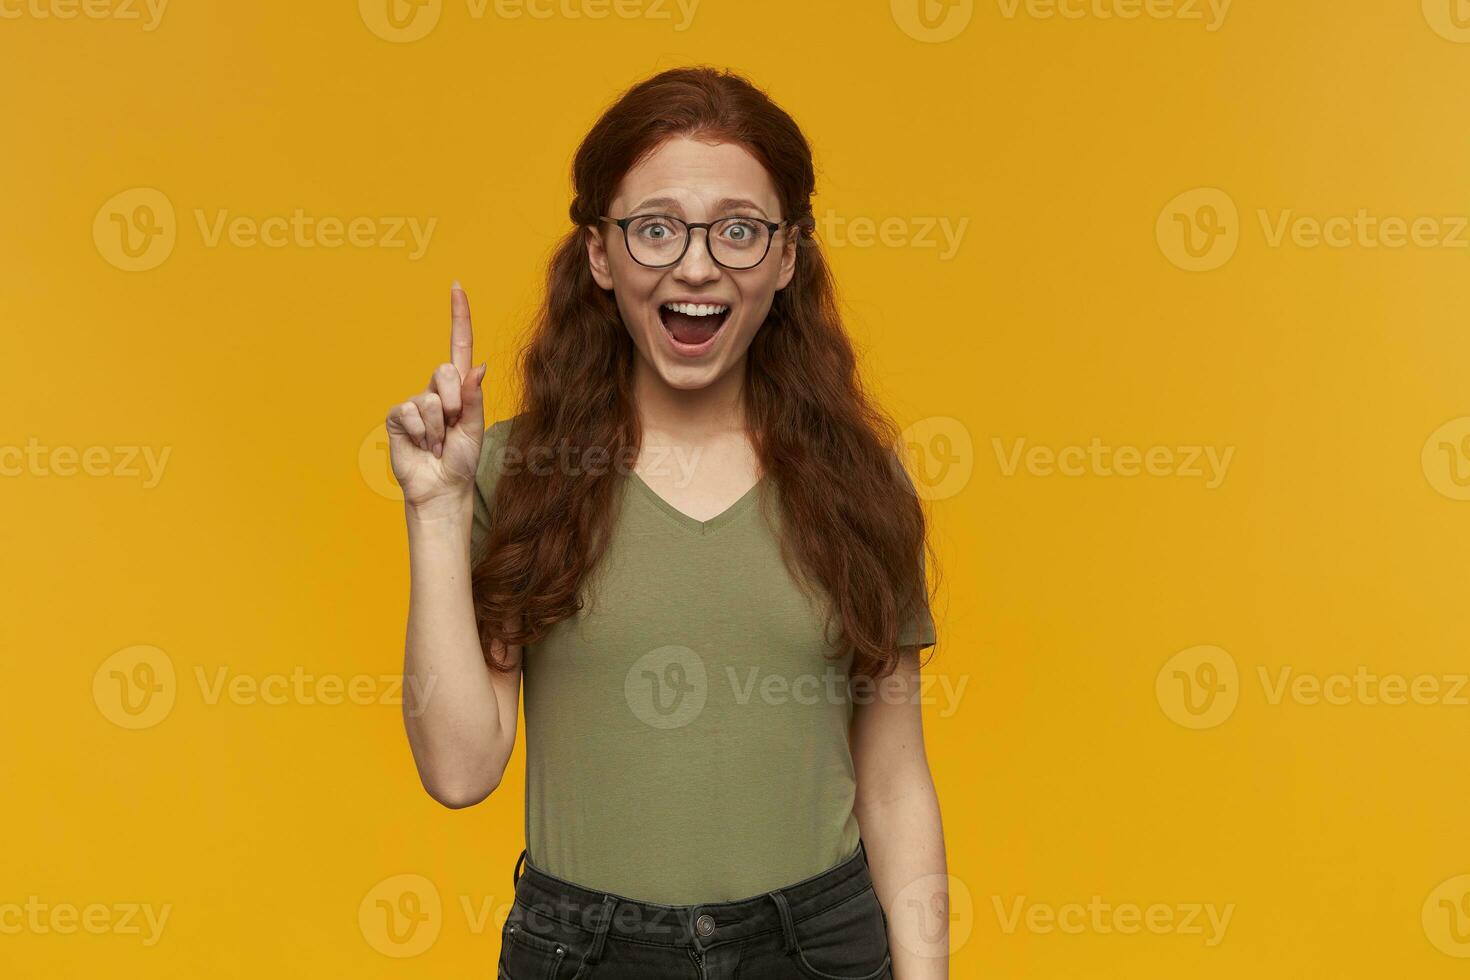 Cute, positive woman with long ginger hair. Wearing green t-shirt and glasses. People and emotion concept. Raises index finger up, got an idea. Watching at the camera, isolated over orange background photo